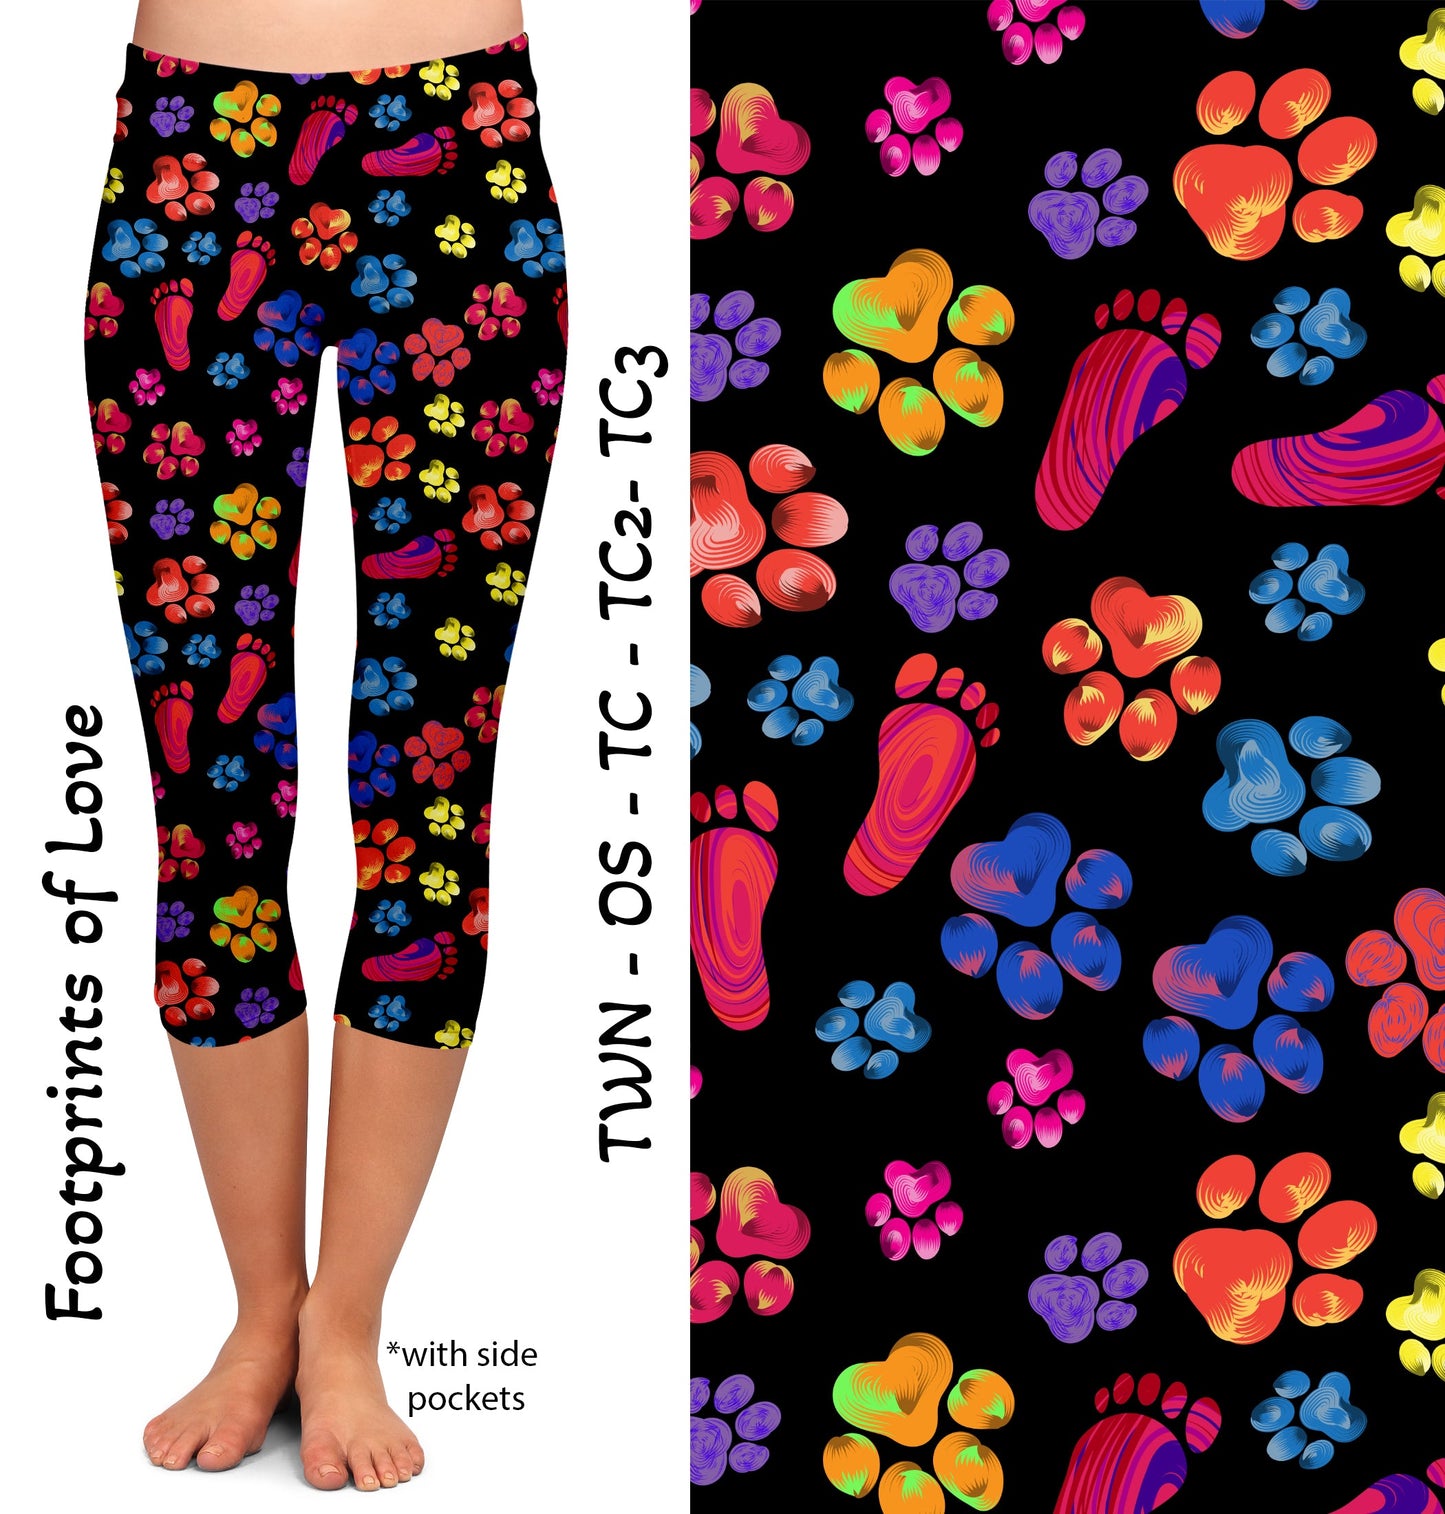 Foot Prints of Love  Leggings & Capris with Pockets